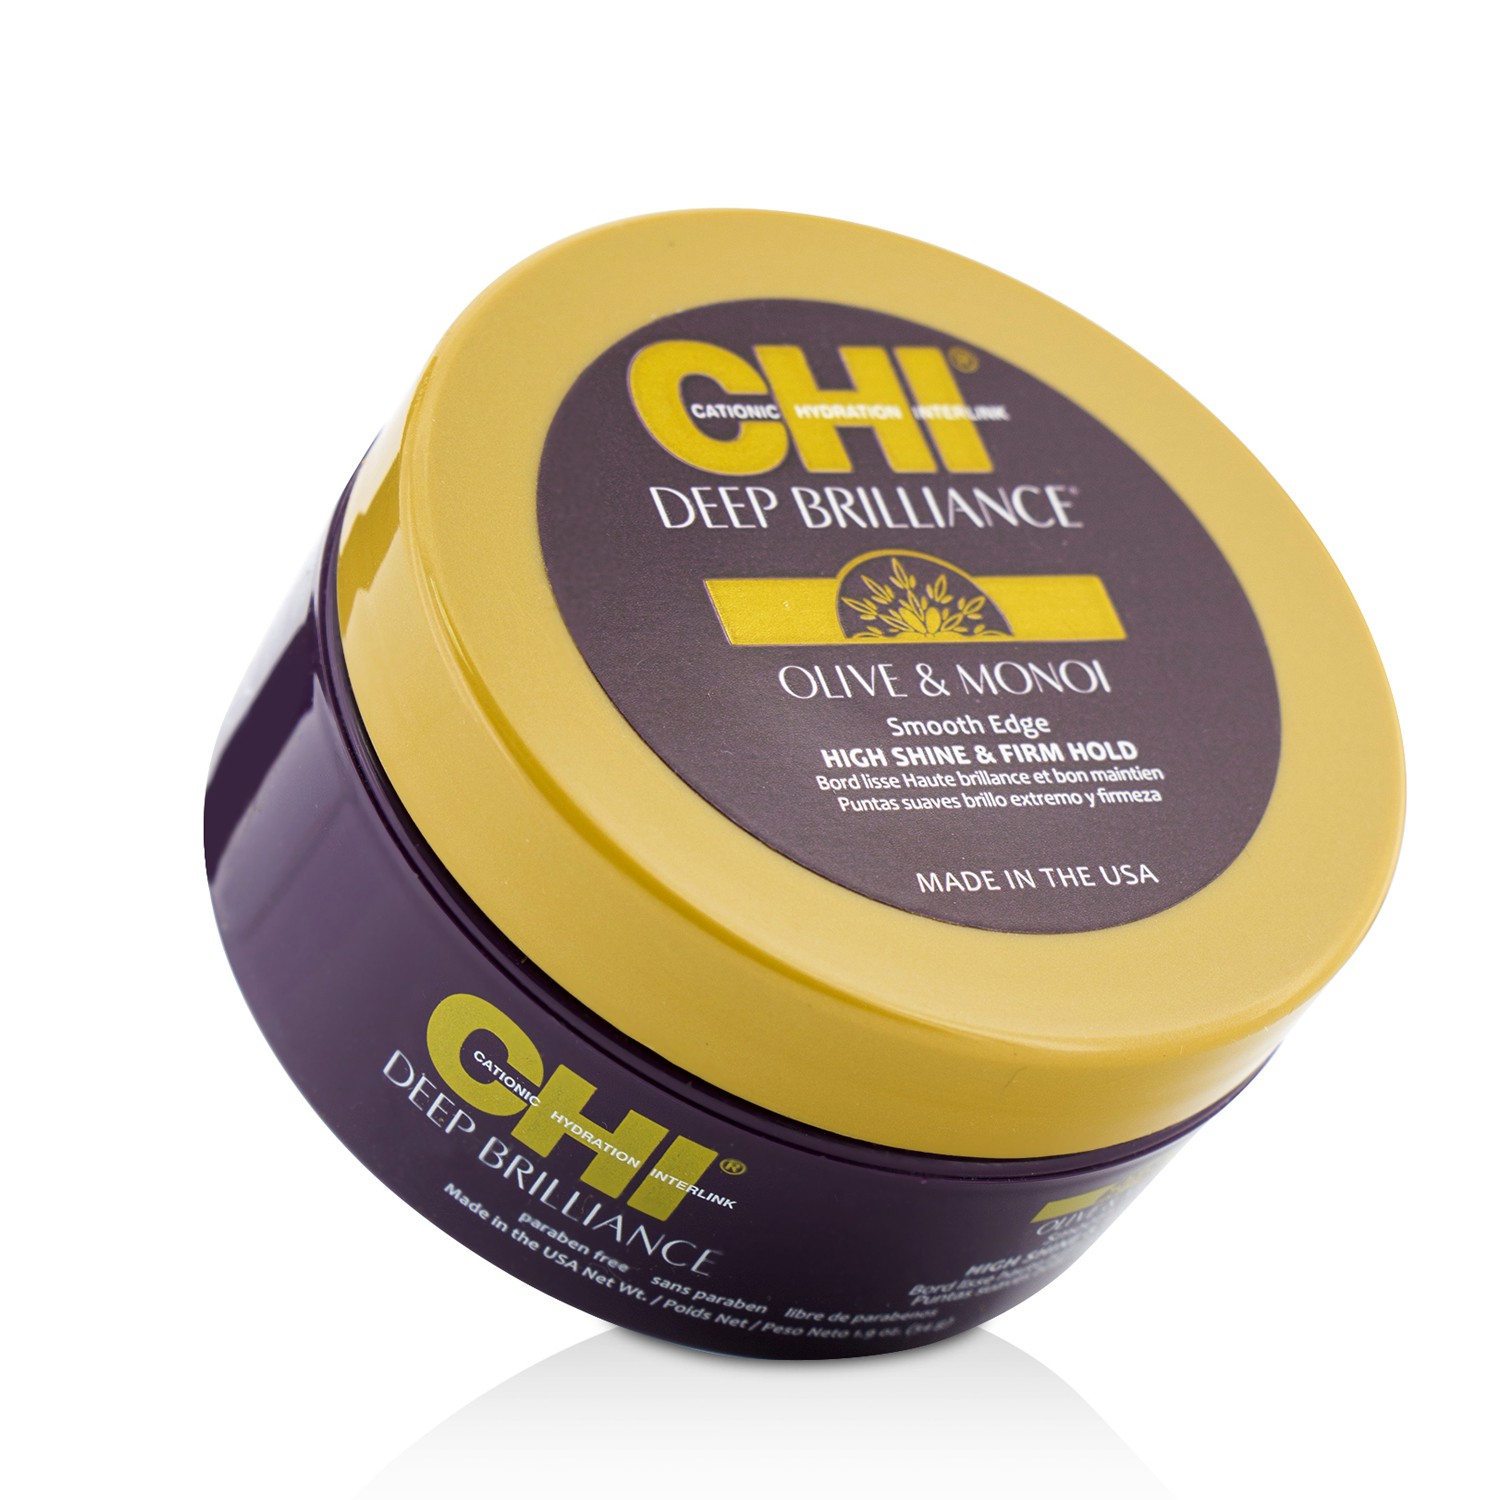 Deep Brilliance Olive & Monoi Smooth Edge (High Shine and Firm Hold) CHI Image